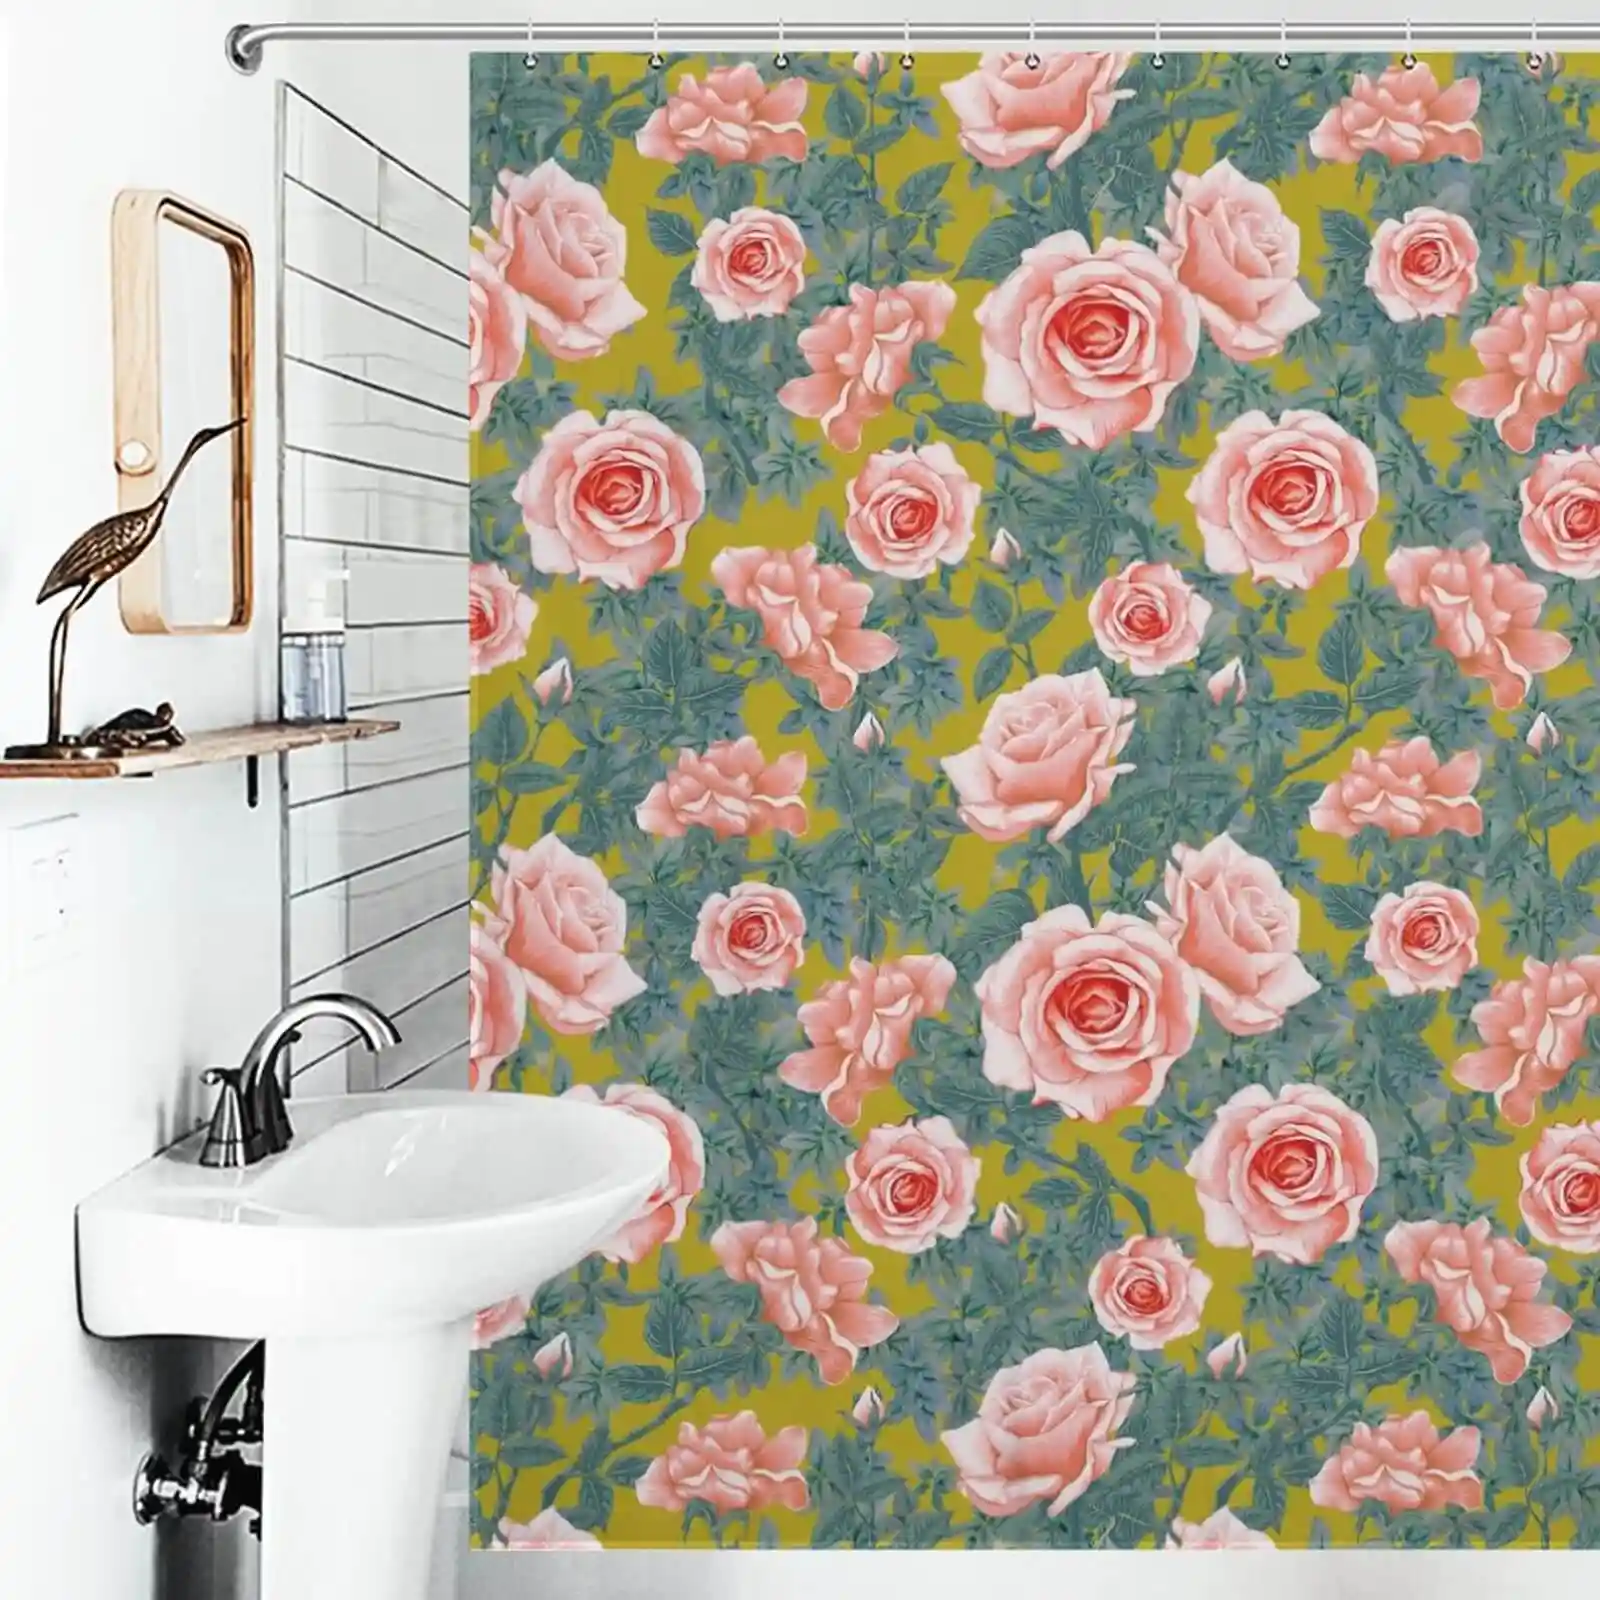 A shower curtain with pink roses and green leaves.